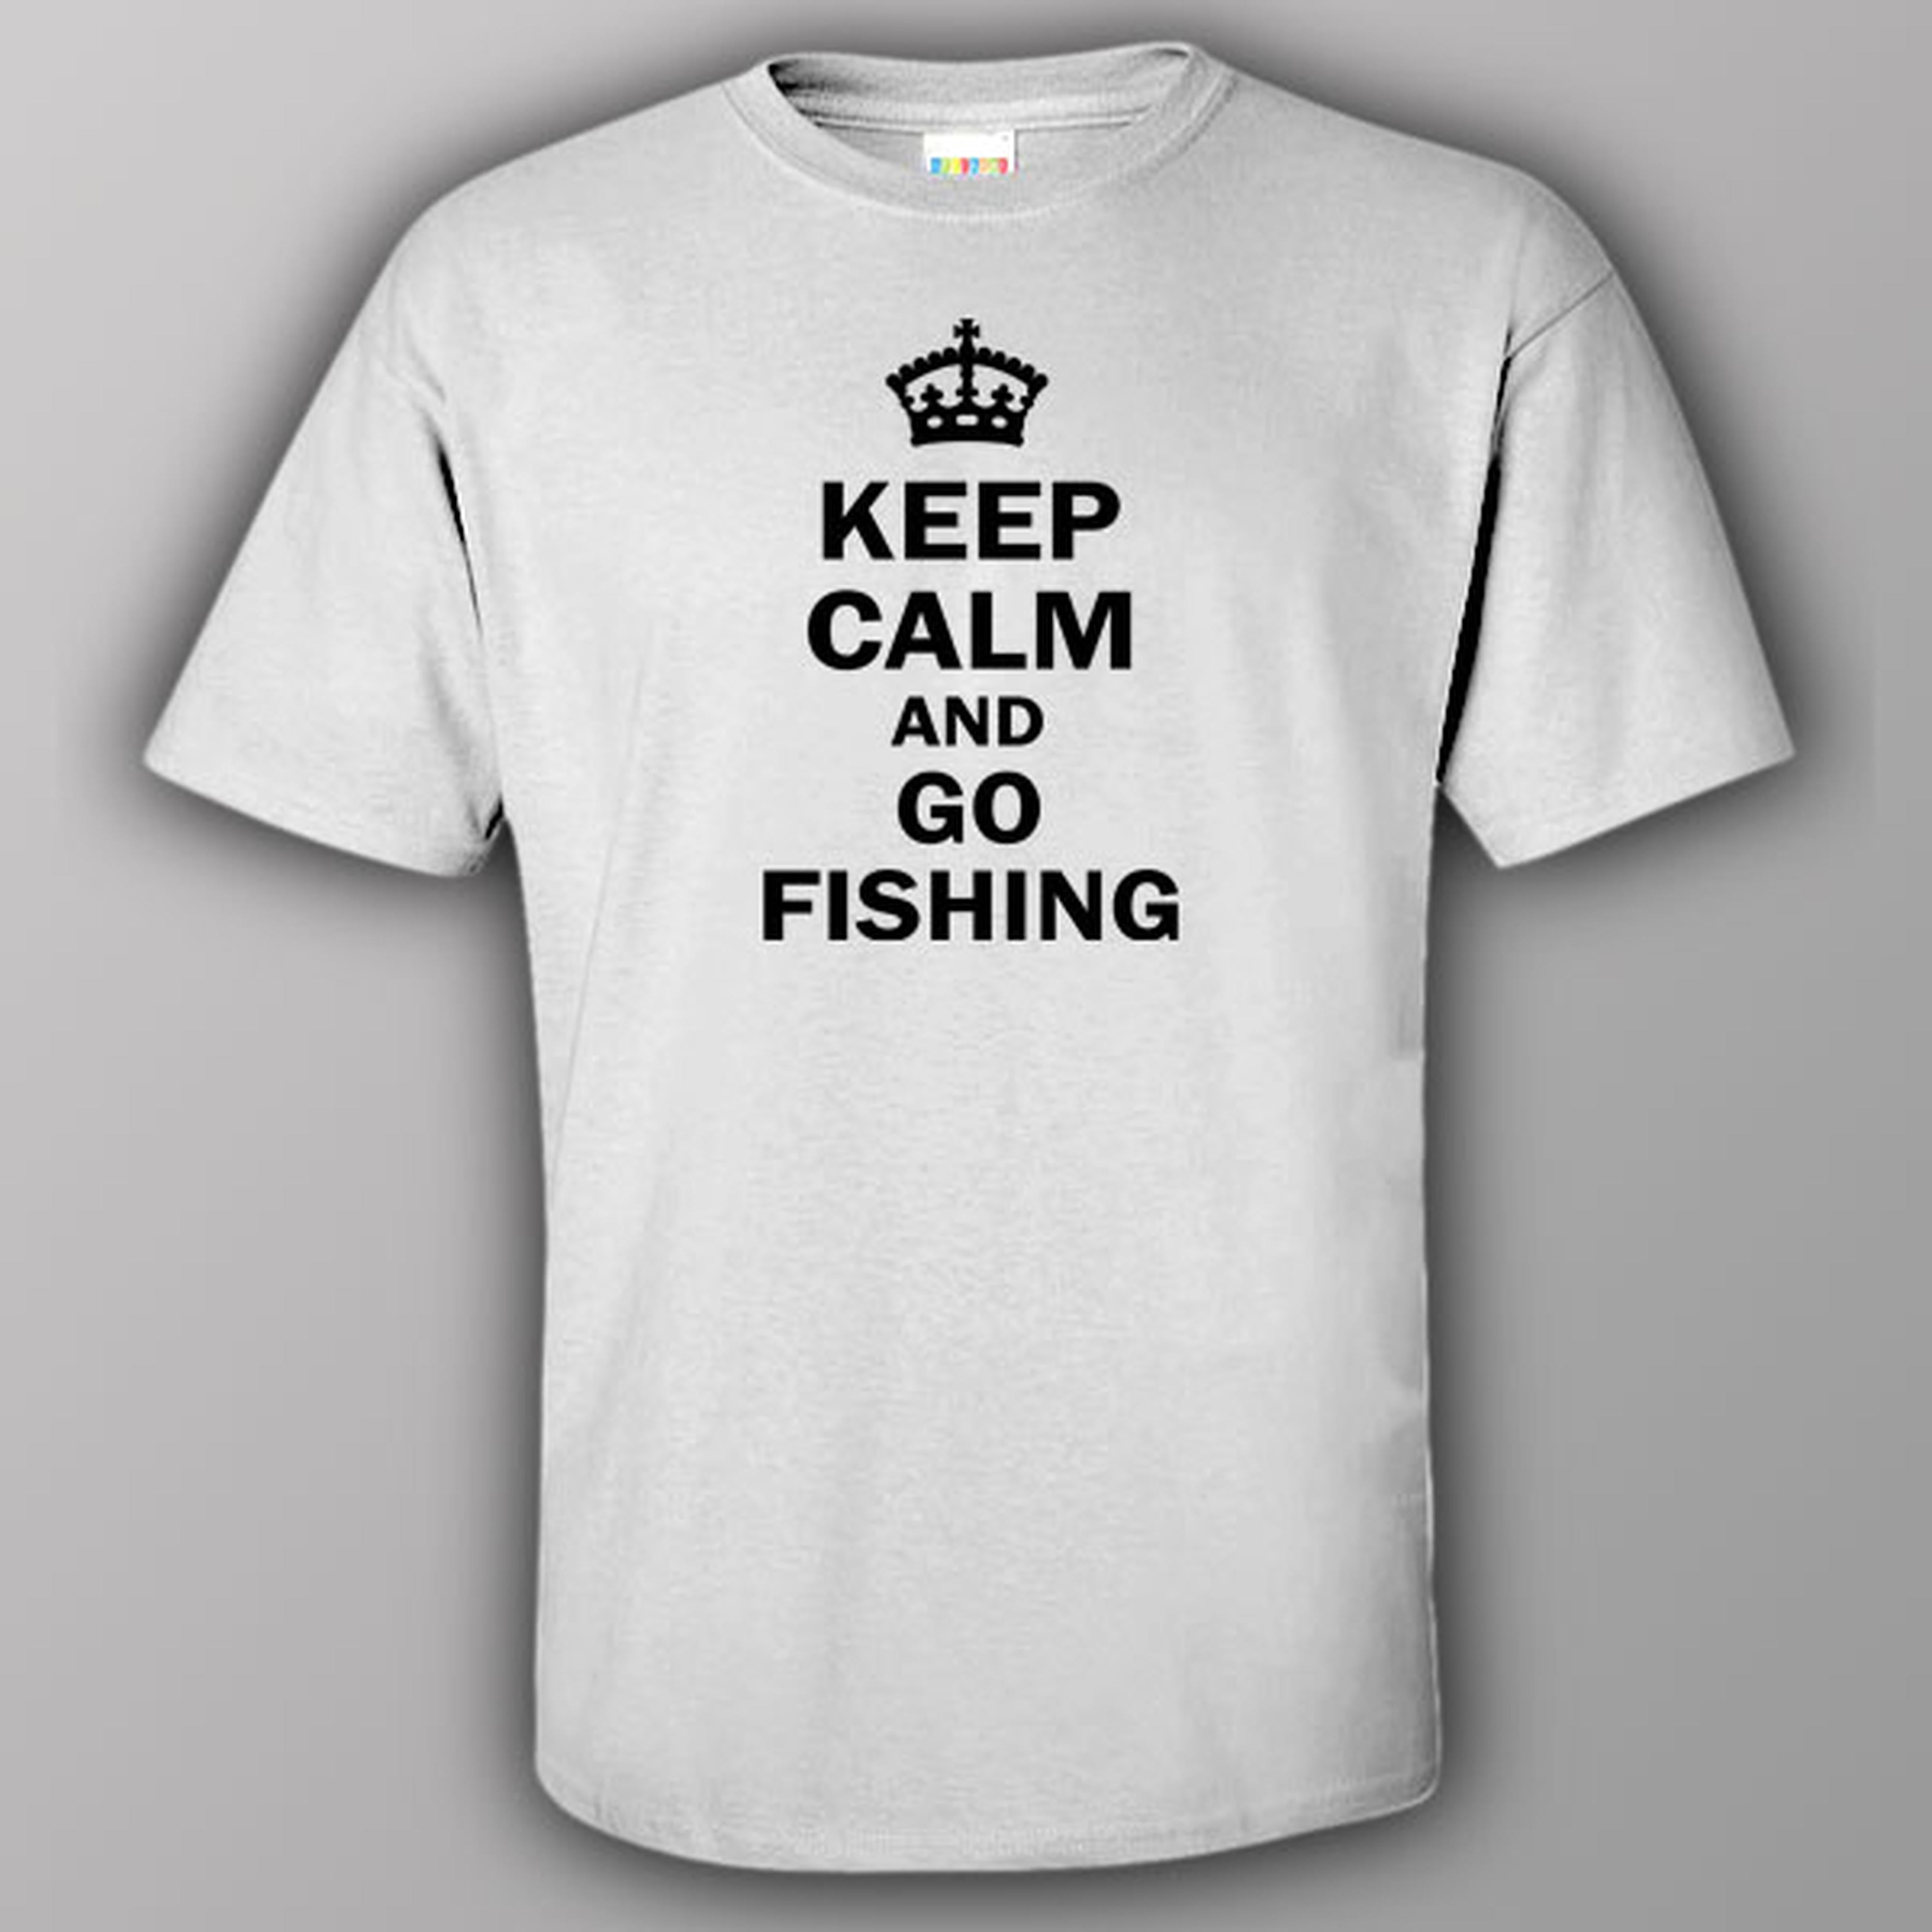 Keep calm and go fishing - T-shirt